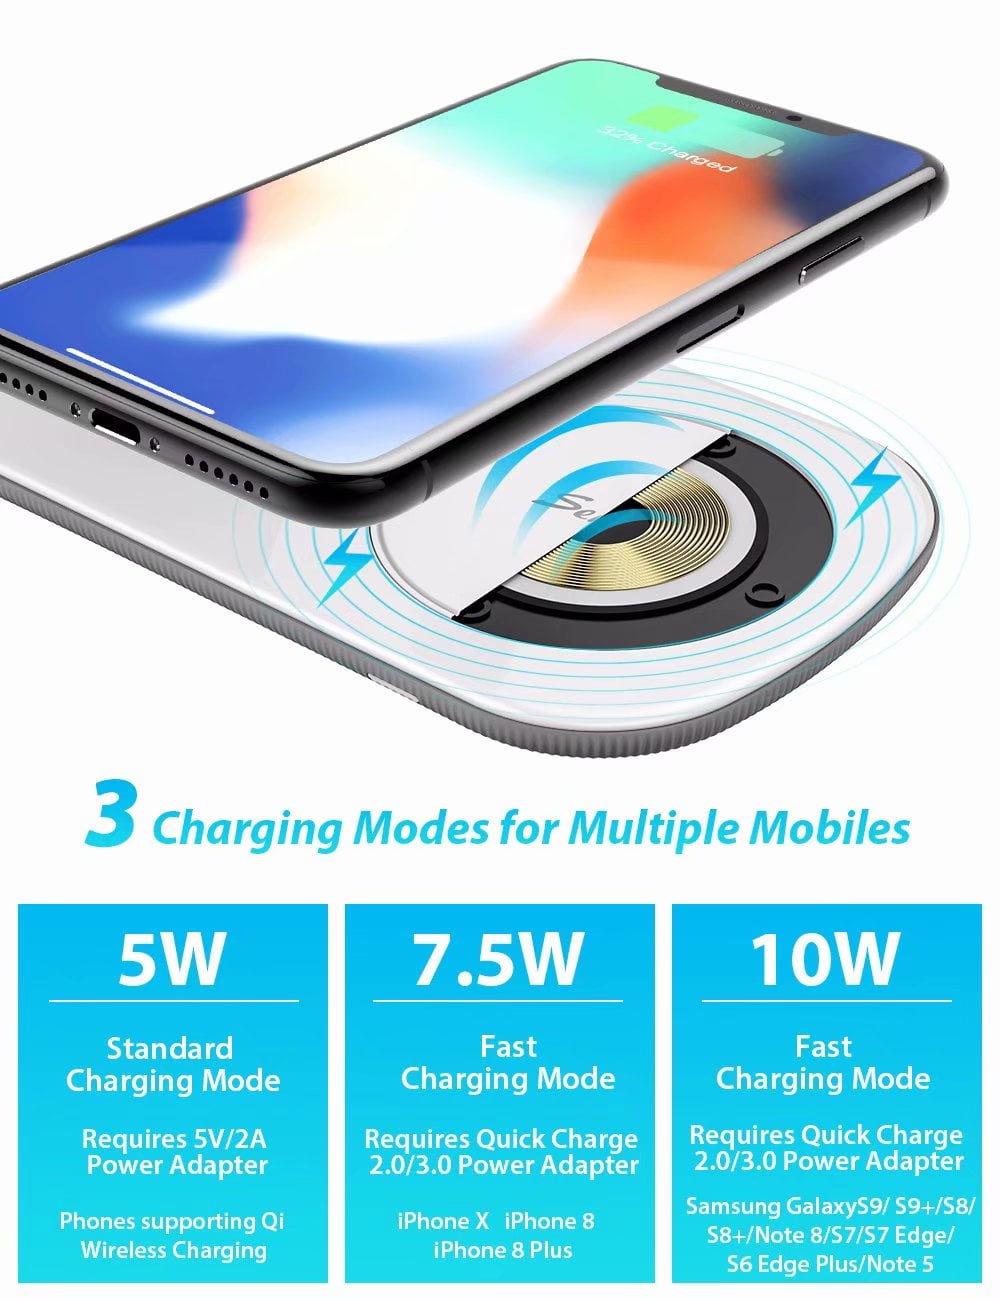 Seneo 2 In 1 Wireless Charger Iwatch Charging Stand Fast Wireless Mobile Charger With Aluminum Alloy Silicone Materials For Iphone X 8 8plus Samsung Galaxy S9 S9 Plus Note 8 S7 S7 Edge Etc